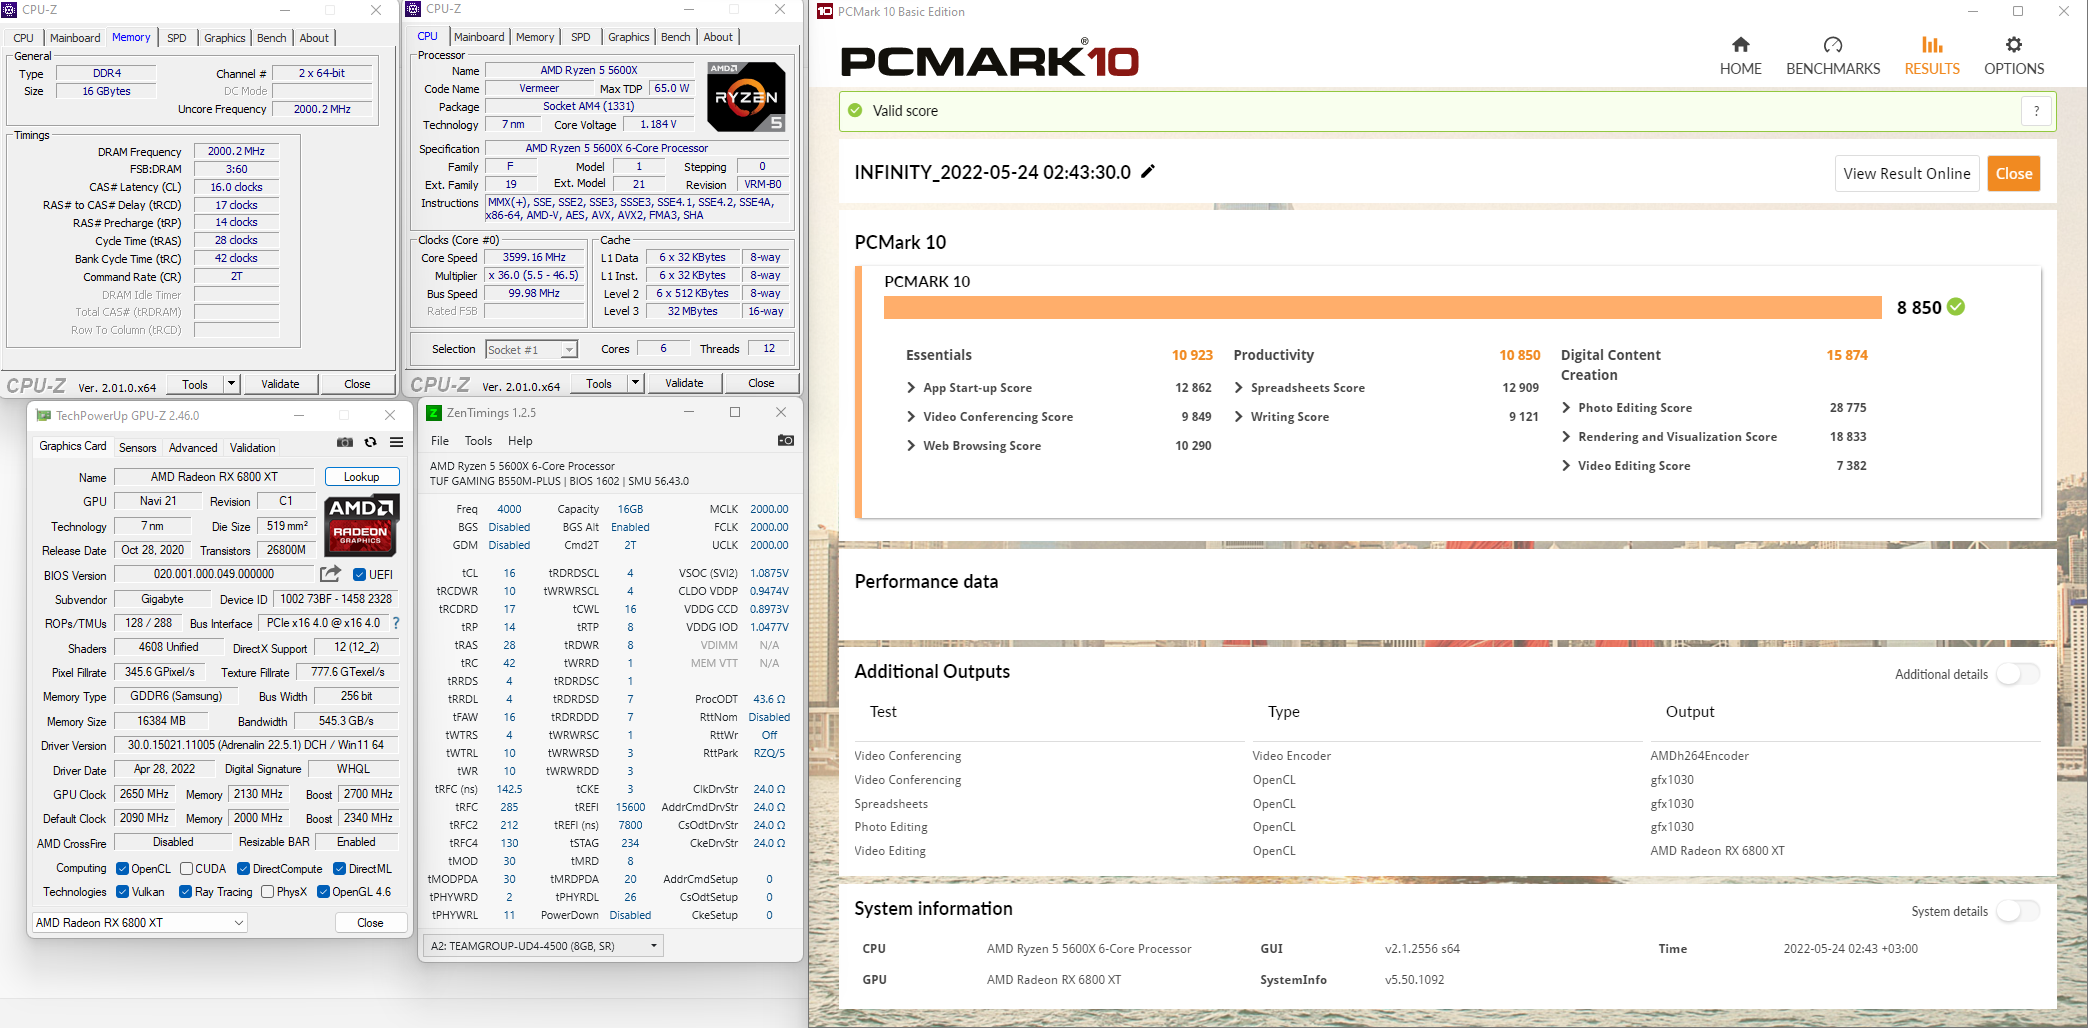 PCMark`10_8850.png